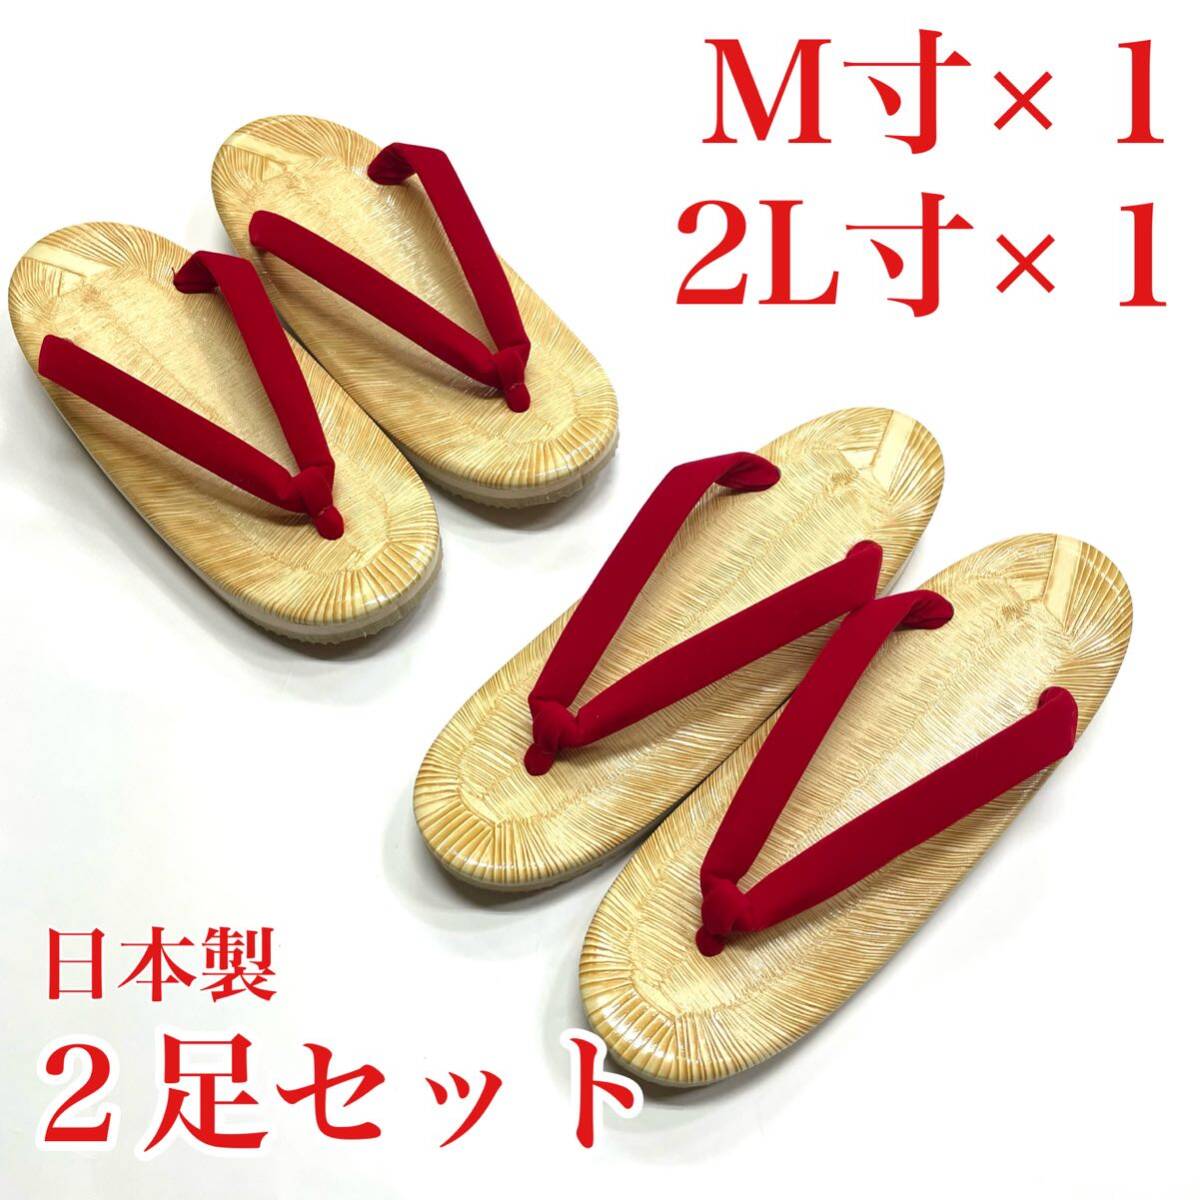 2 pair red nose . zori woman tatami tatami table for women woman for lady woman zori red color sandals setta woman sandals setta red nose . Sand festival for zori festival zori M size M 2L size LL